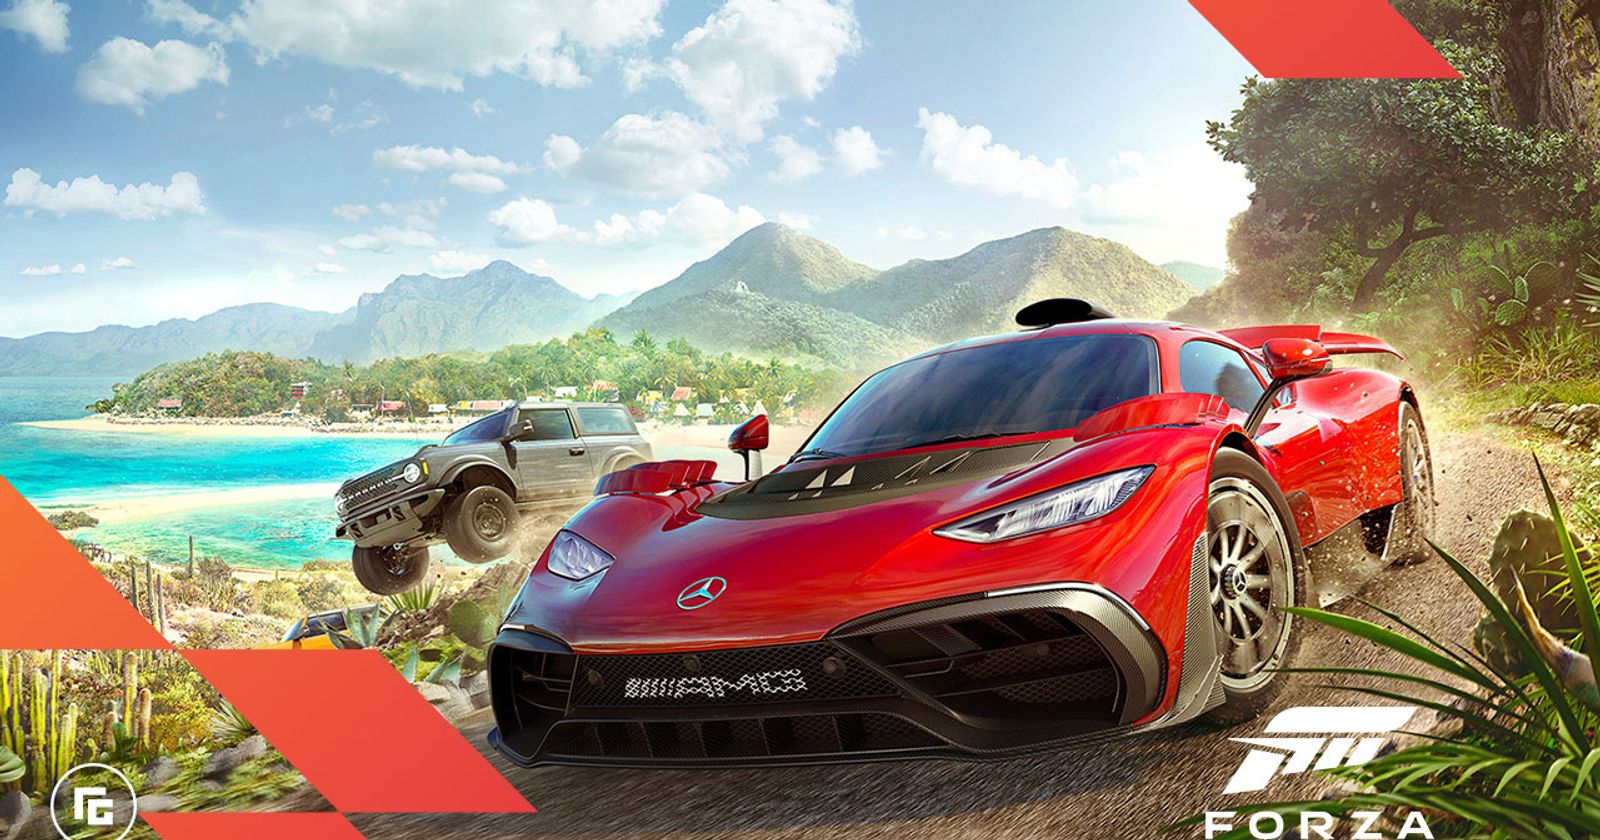 What's the difference between Forza Motorsport and Forza Horizon?